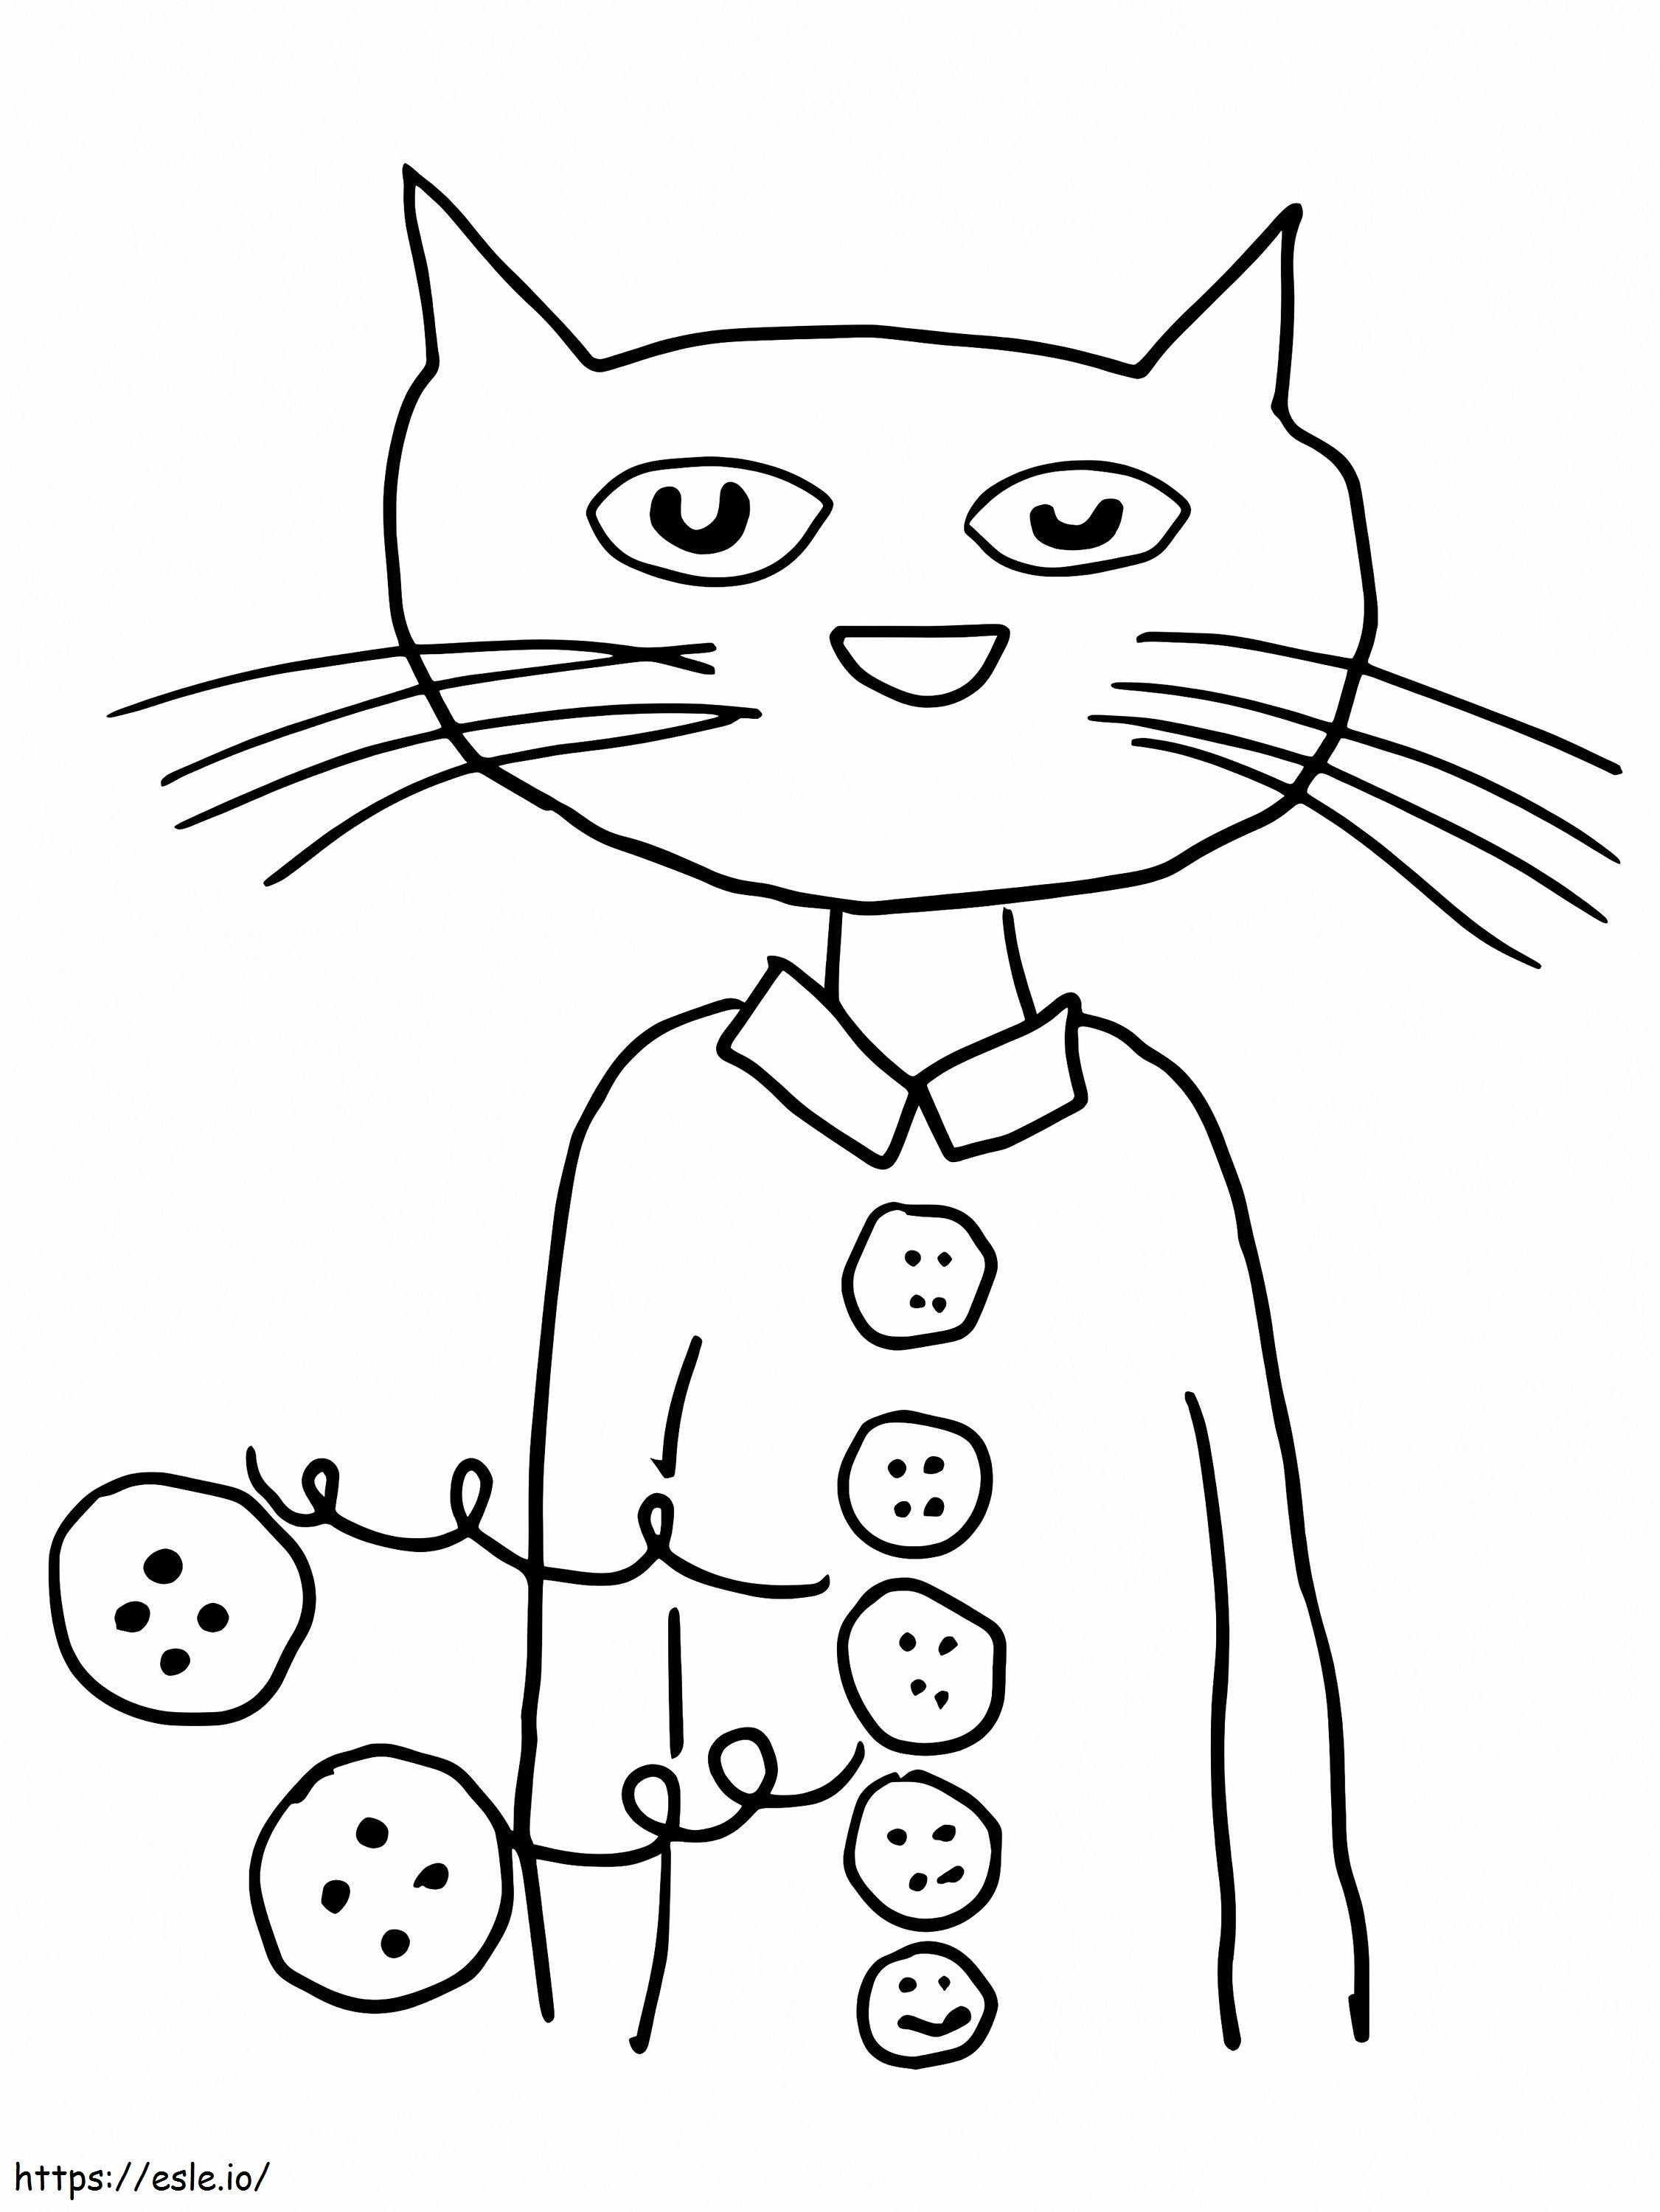 Groovy Buttons Pete The Cat coloring page